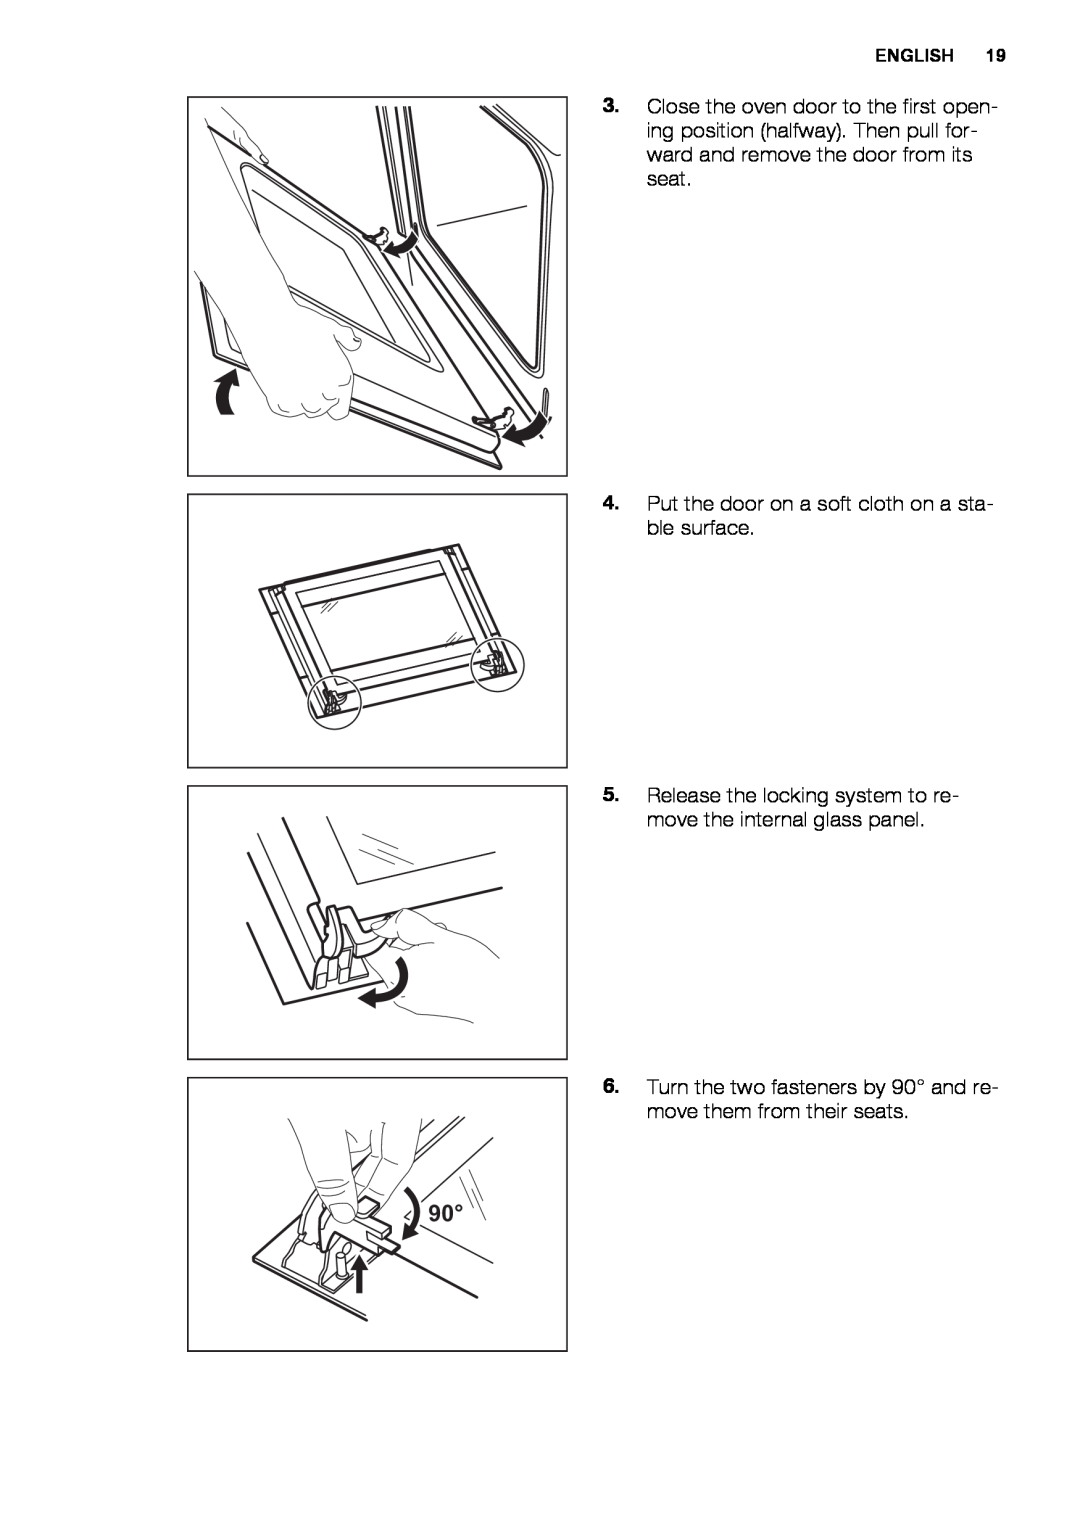 Electrolux EOB3400 user manual Put the door on a soft cloth on a sta- ble surface, English 